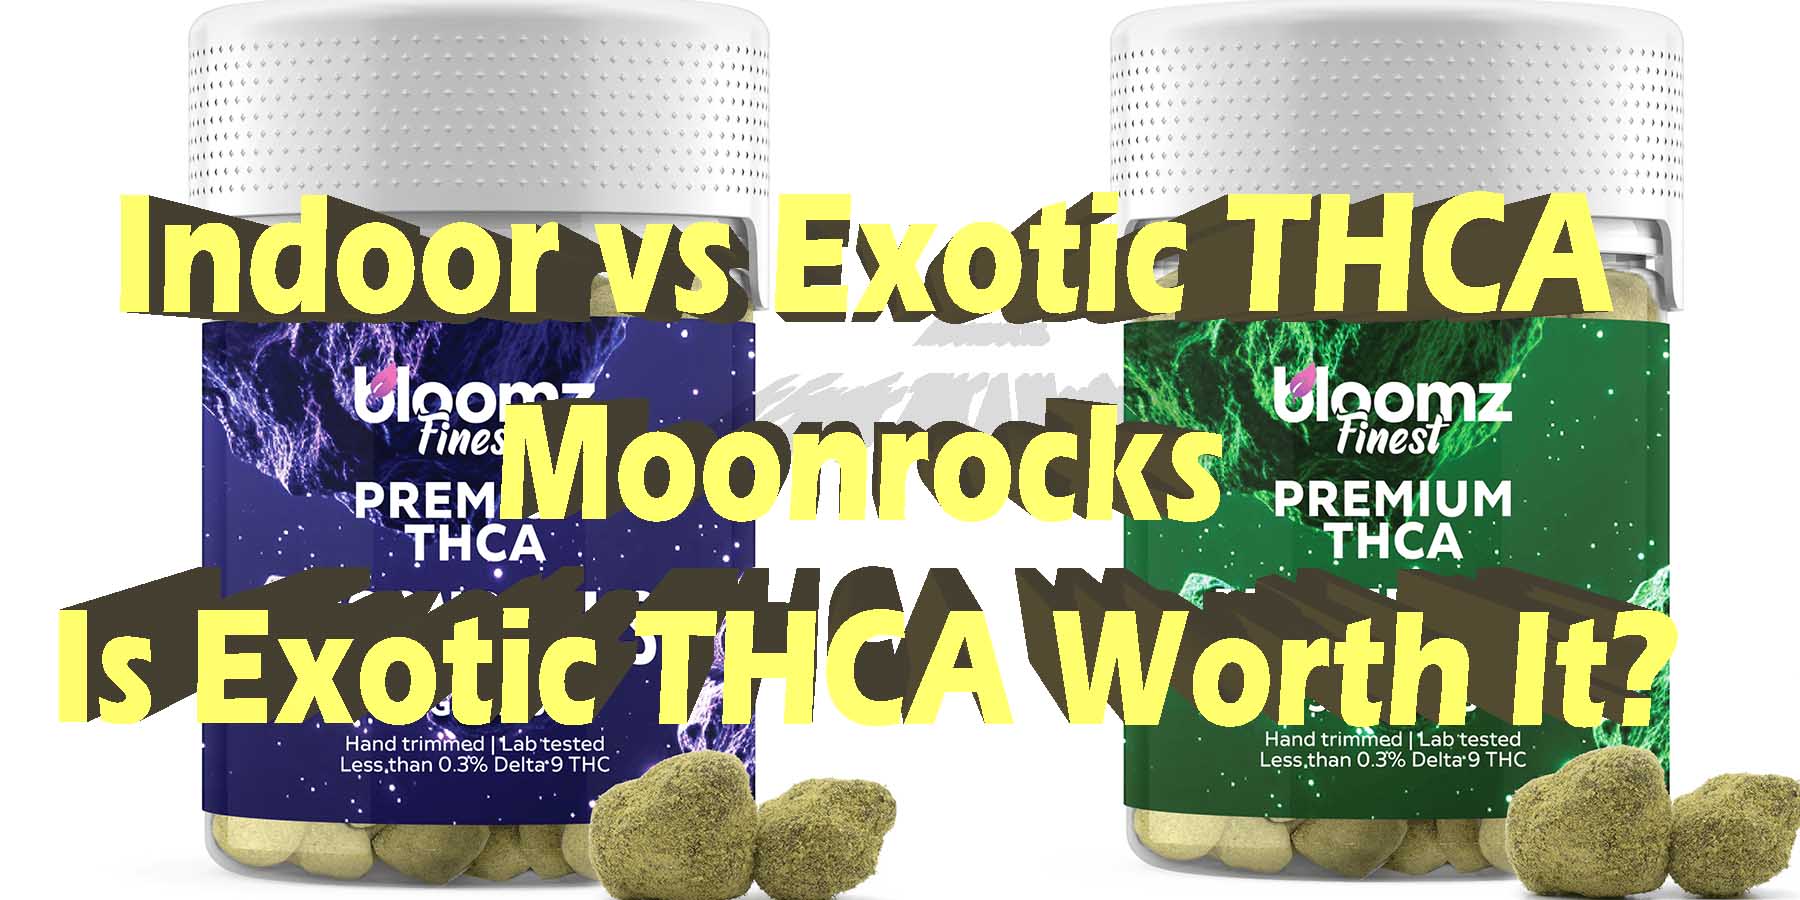 Indoor vs Exotic THCA Moonrocks Is Exotic WorthWhereToGet HowToGetNearMe BestPlace LowestPrice Coupon Discount For Smoking Best High Smoke Shop Online Near Me StrongestBinoid